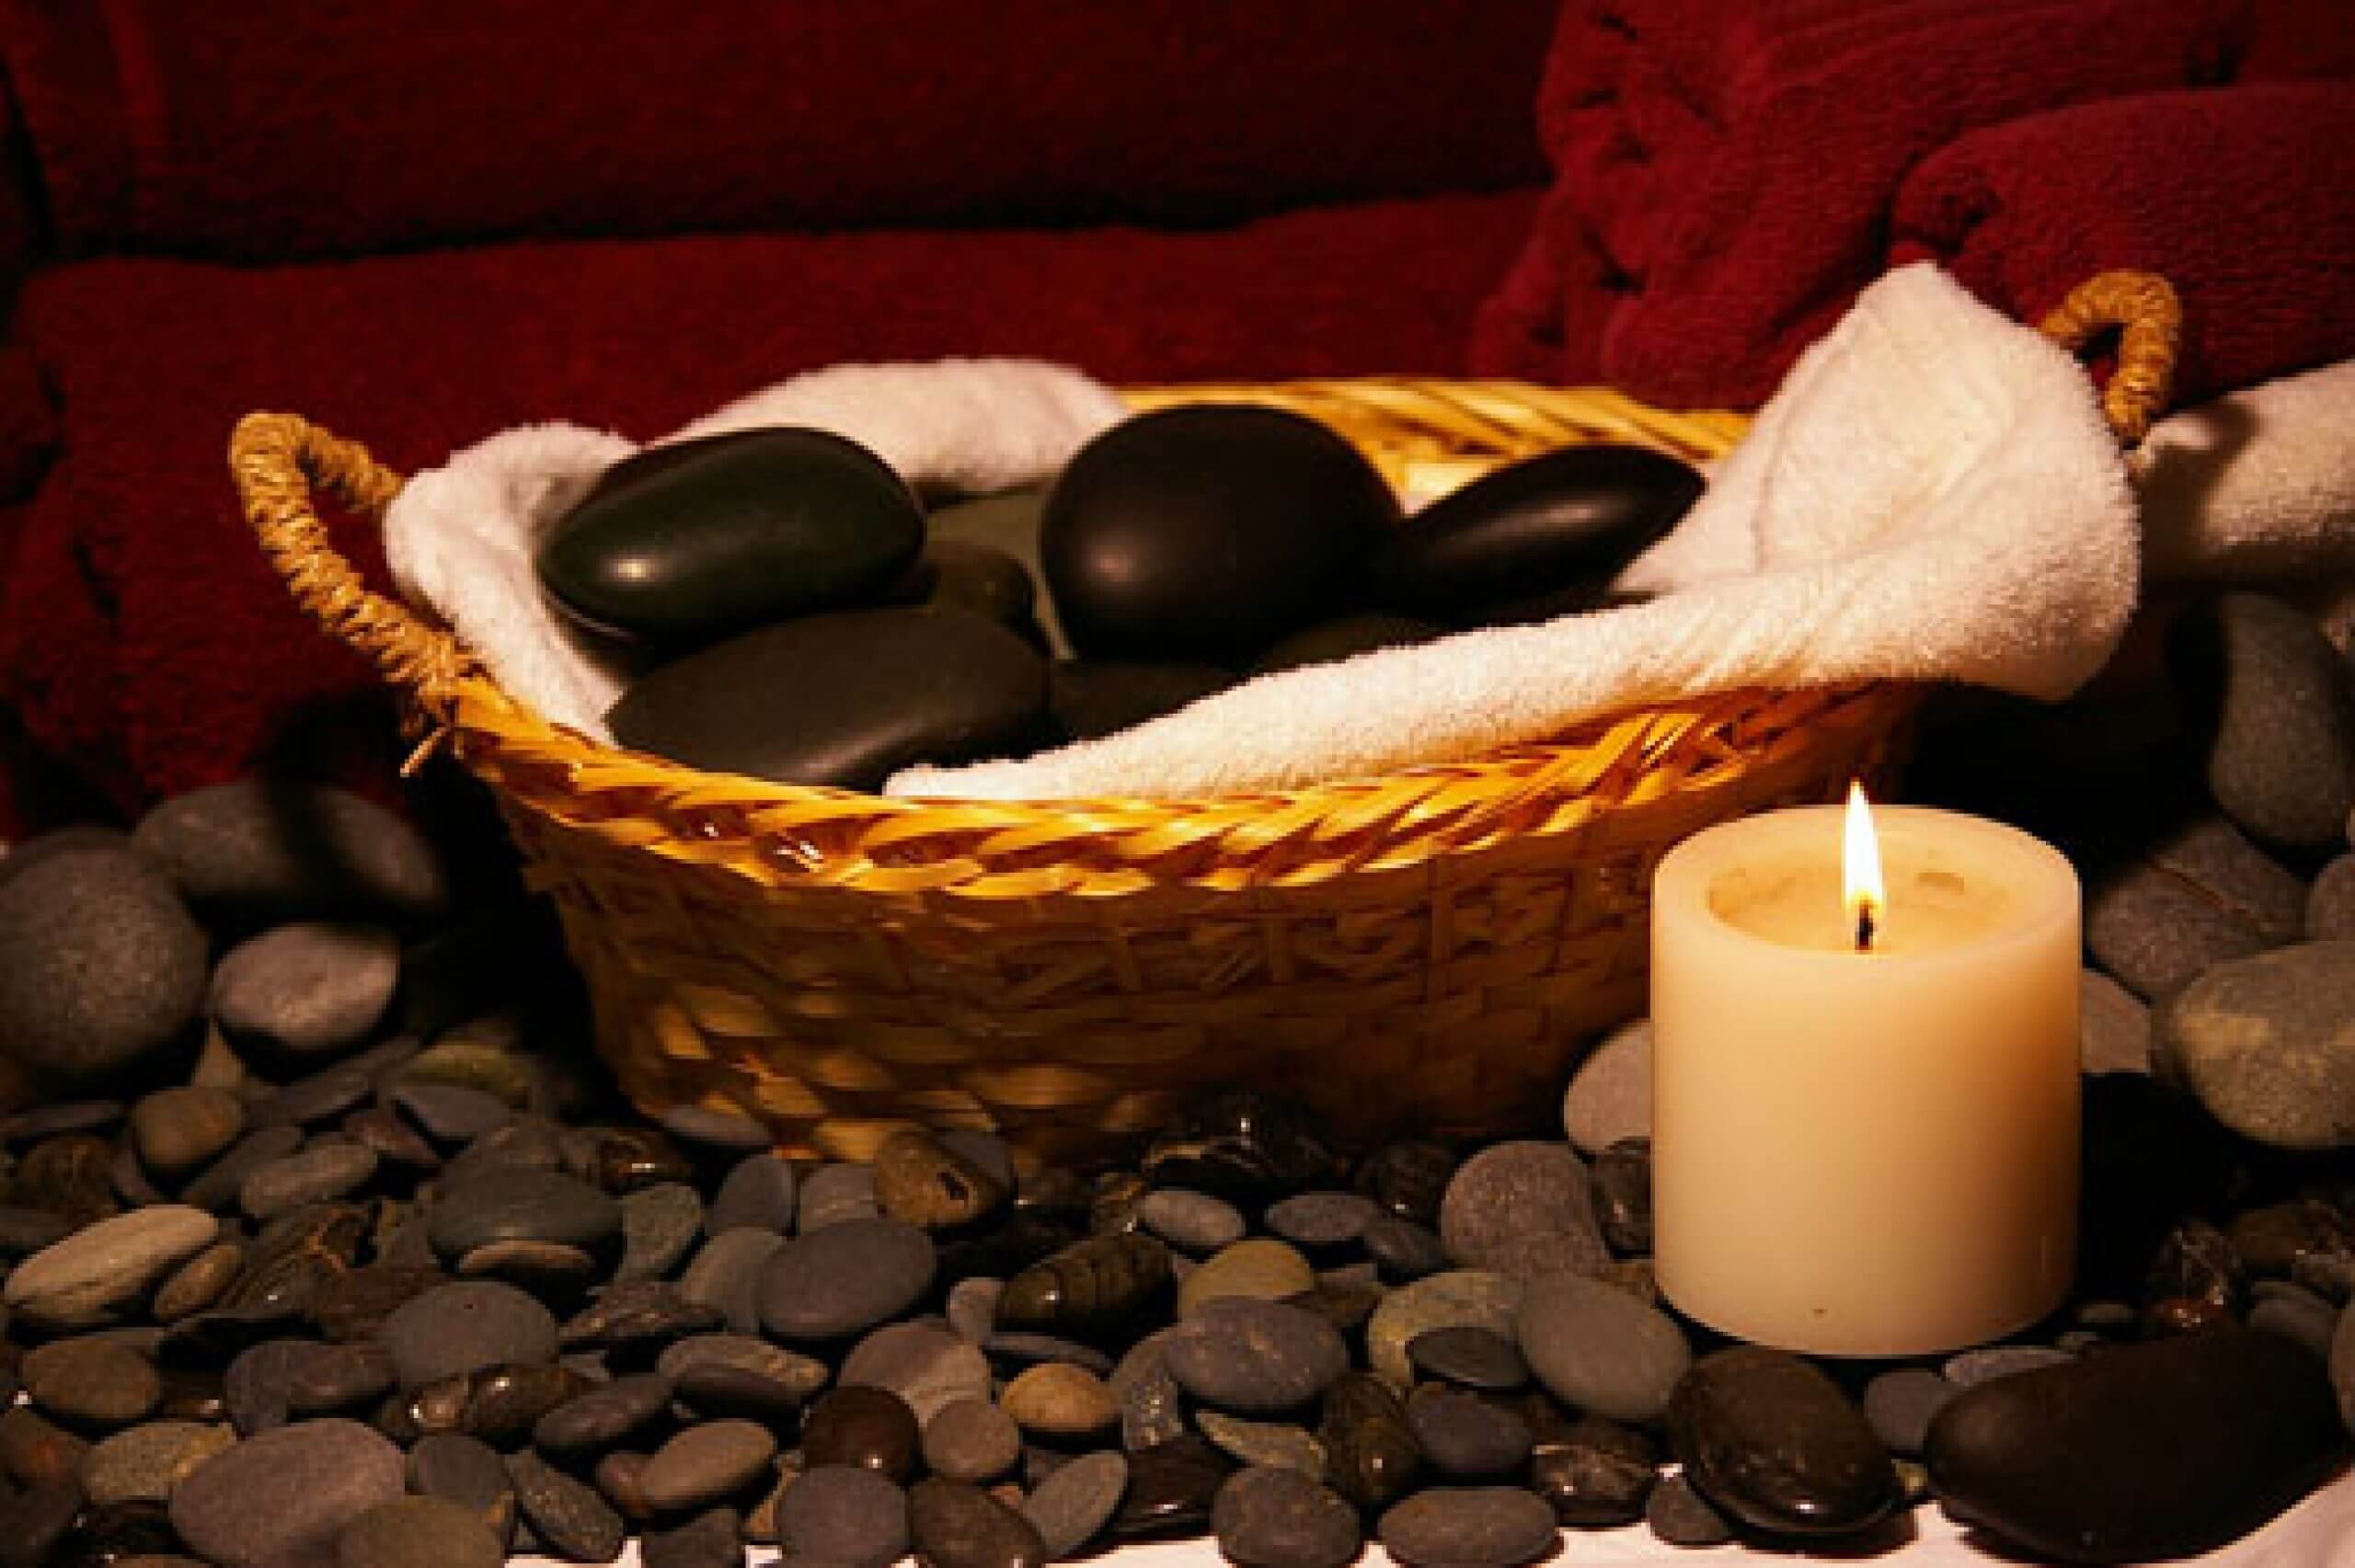 We bring health & relaxation to you.